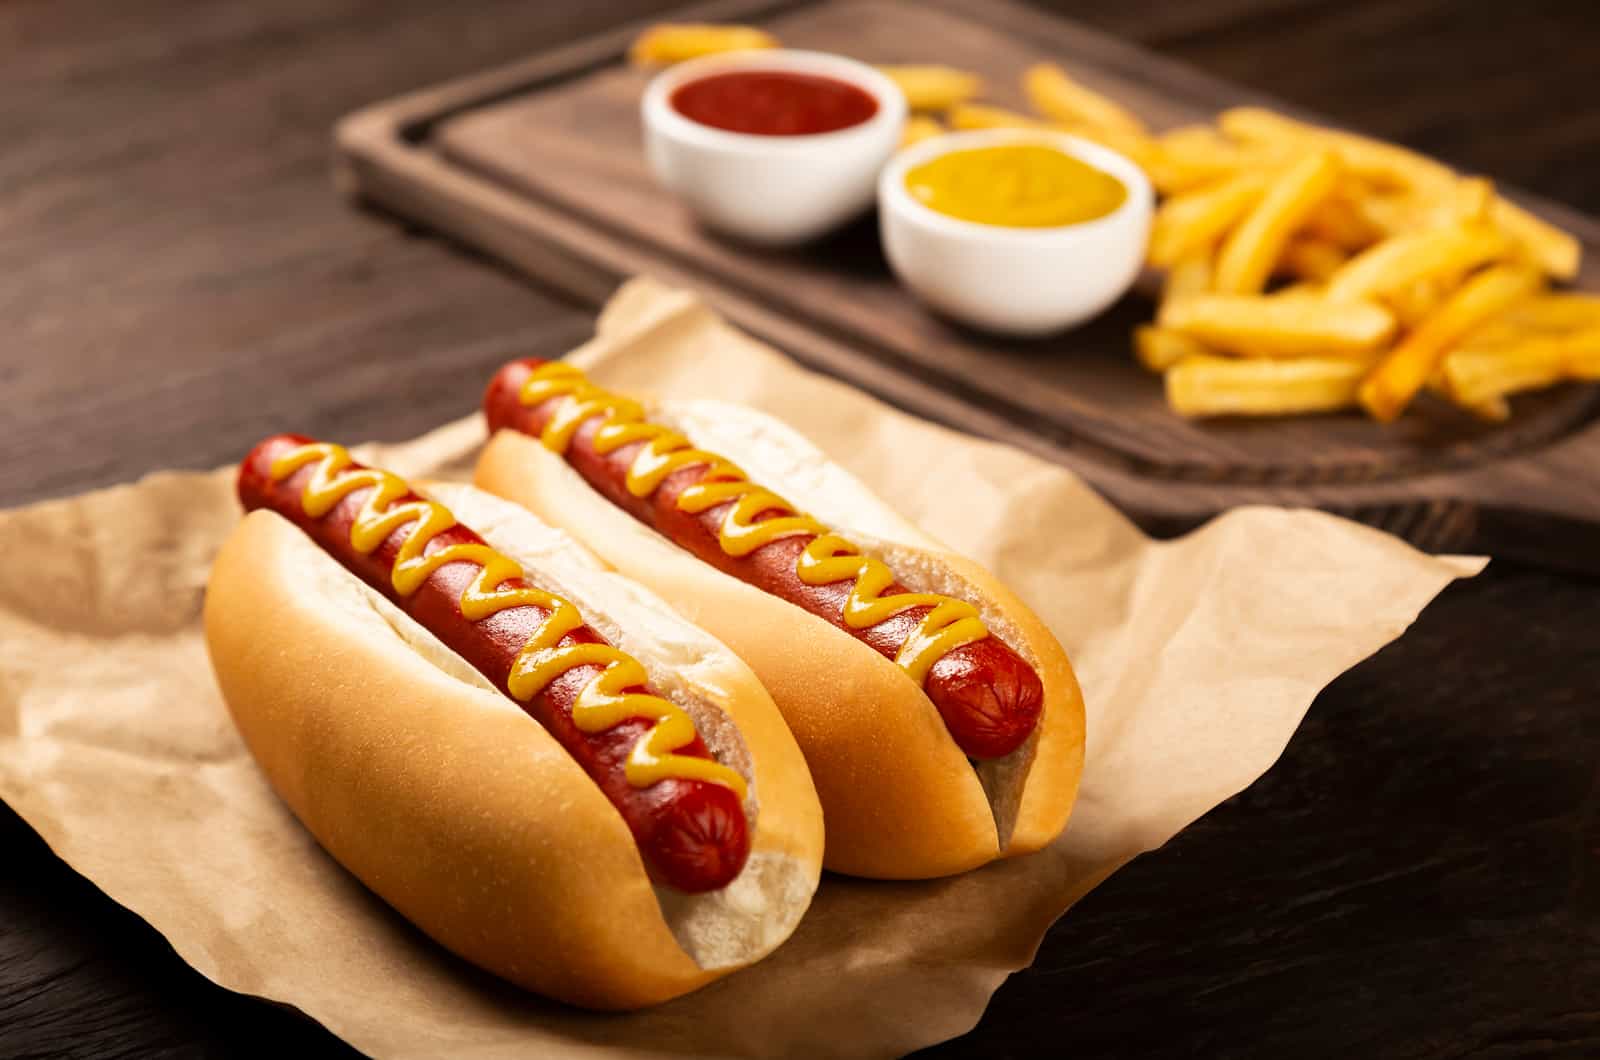 Hot dogs with ketchup, yellow mustard and fries